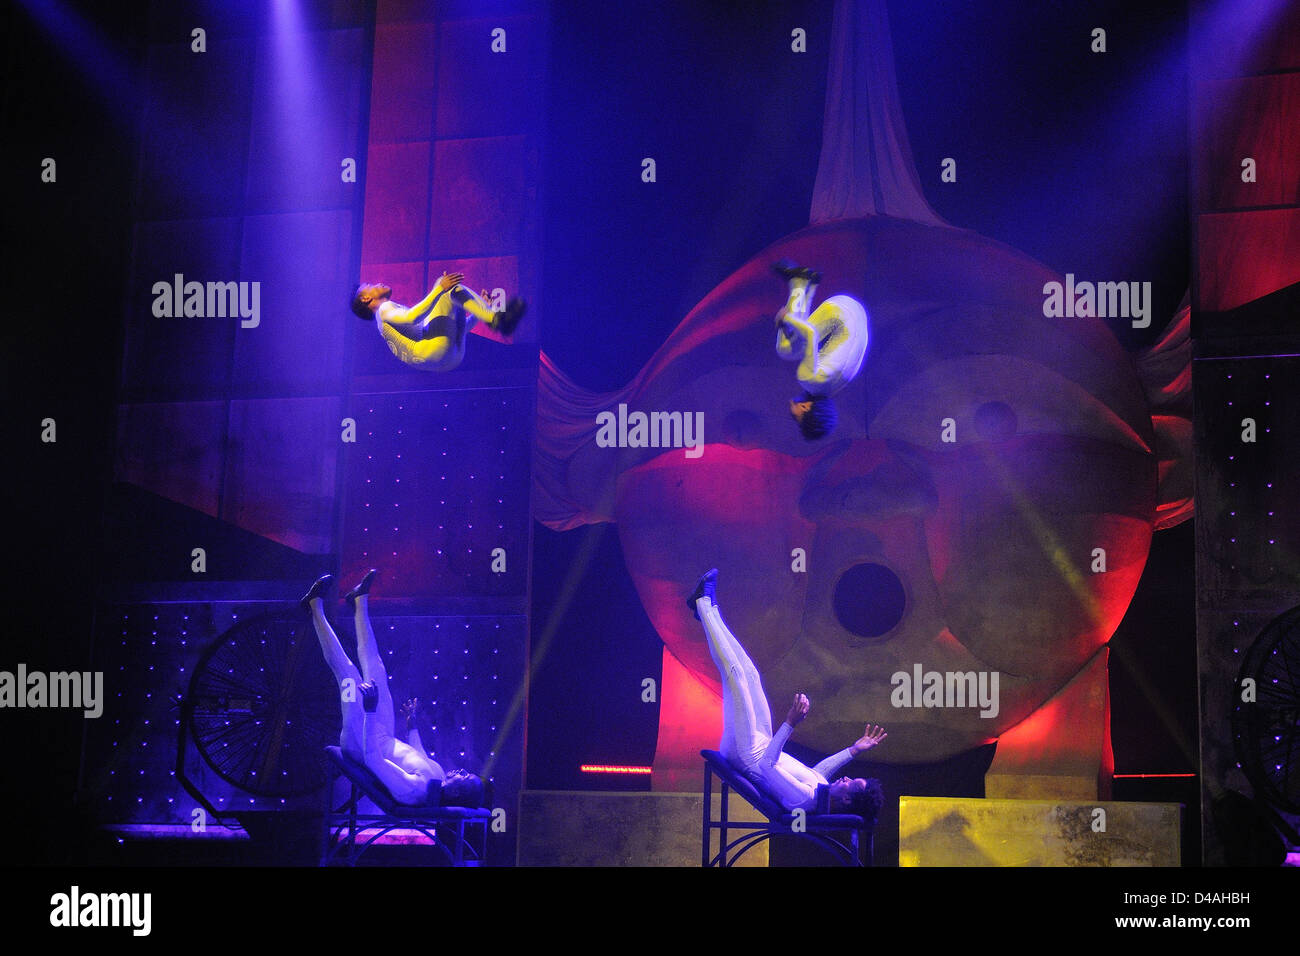 BARCELONA, SPAIN - FEB 27: Artists performs at Cirque's show Eoloh on February 27, 2013 in Barcelona, Spain. Stock Photo